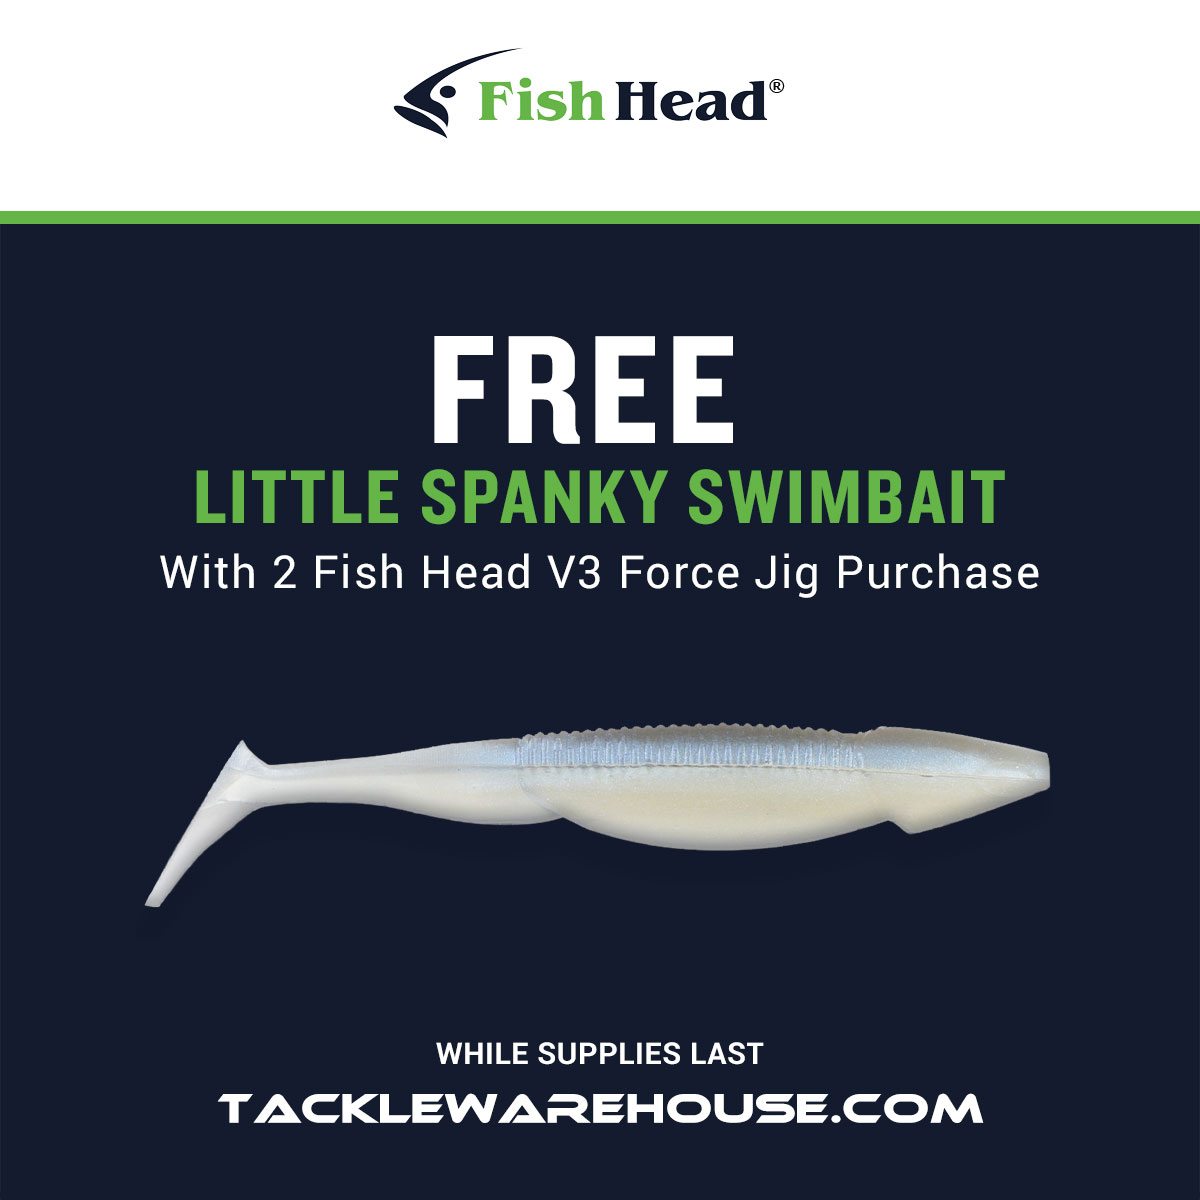 FREE Little Spanky with (2) Fish Head V3 Force Jig Purchase